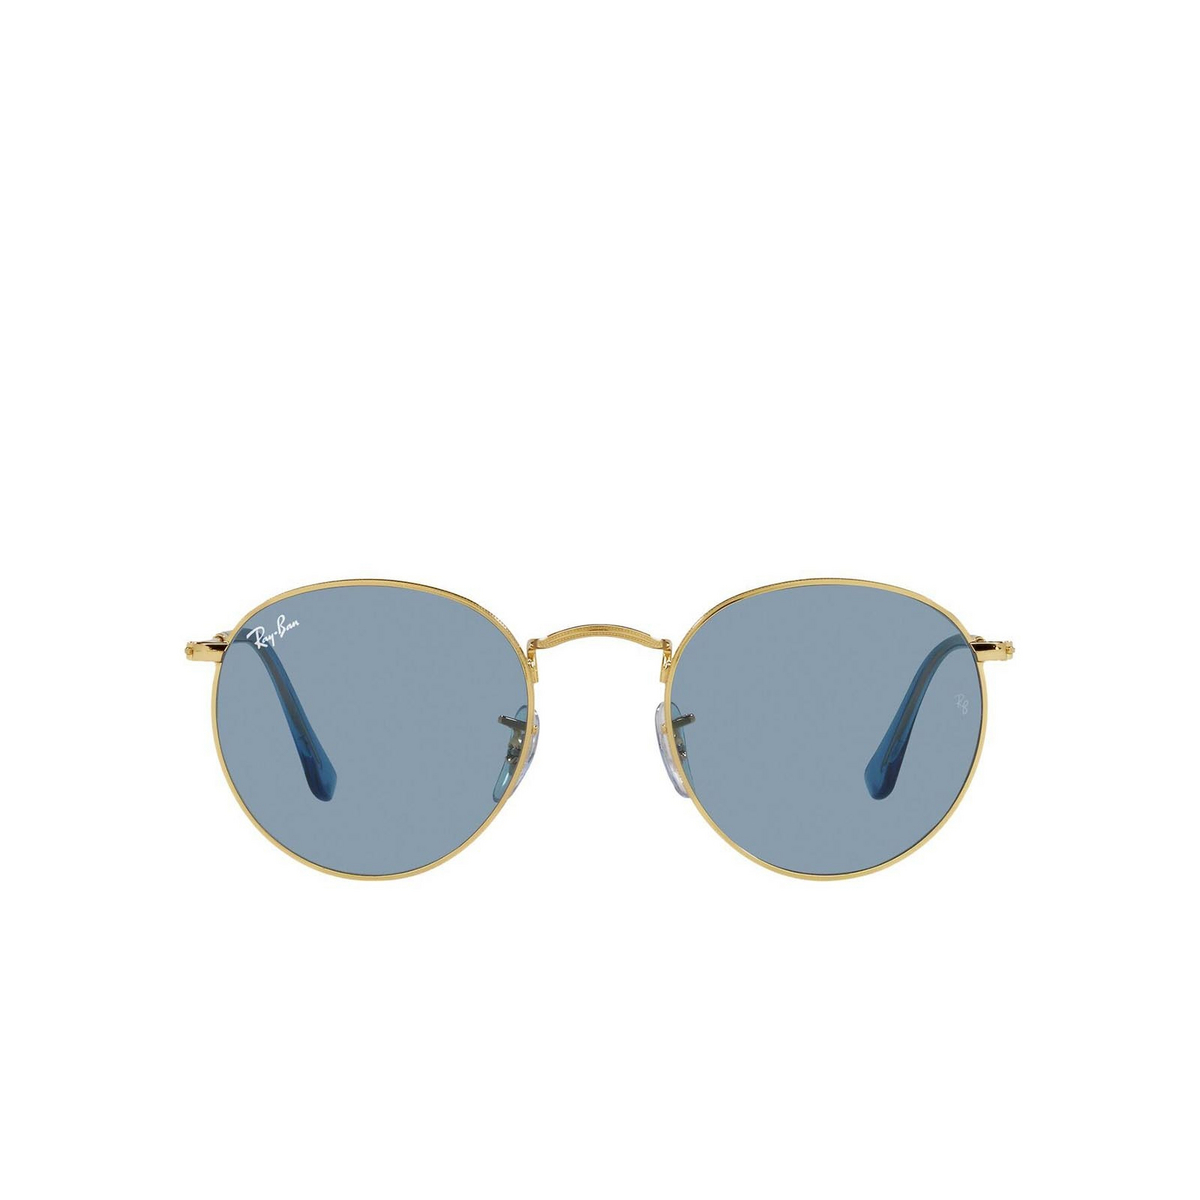 Ray-Ban® Round Sunglasses: RB3447 Round Metal color 001/56 True Blue - 1/3